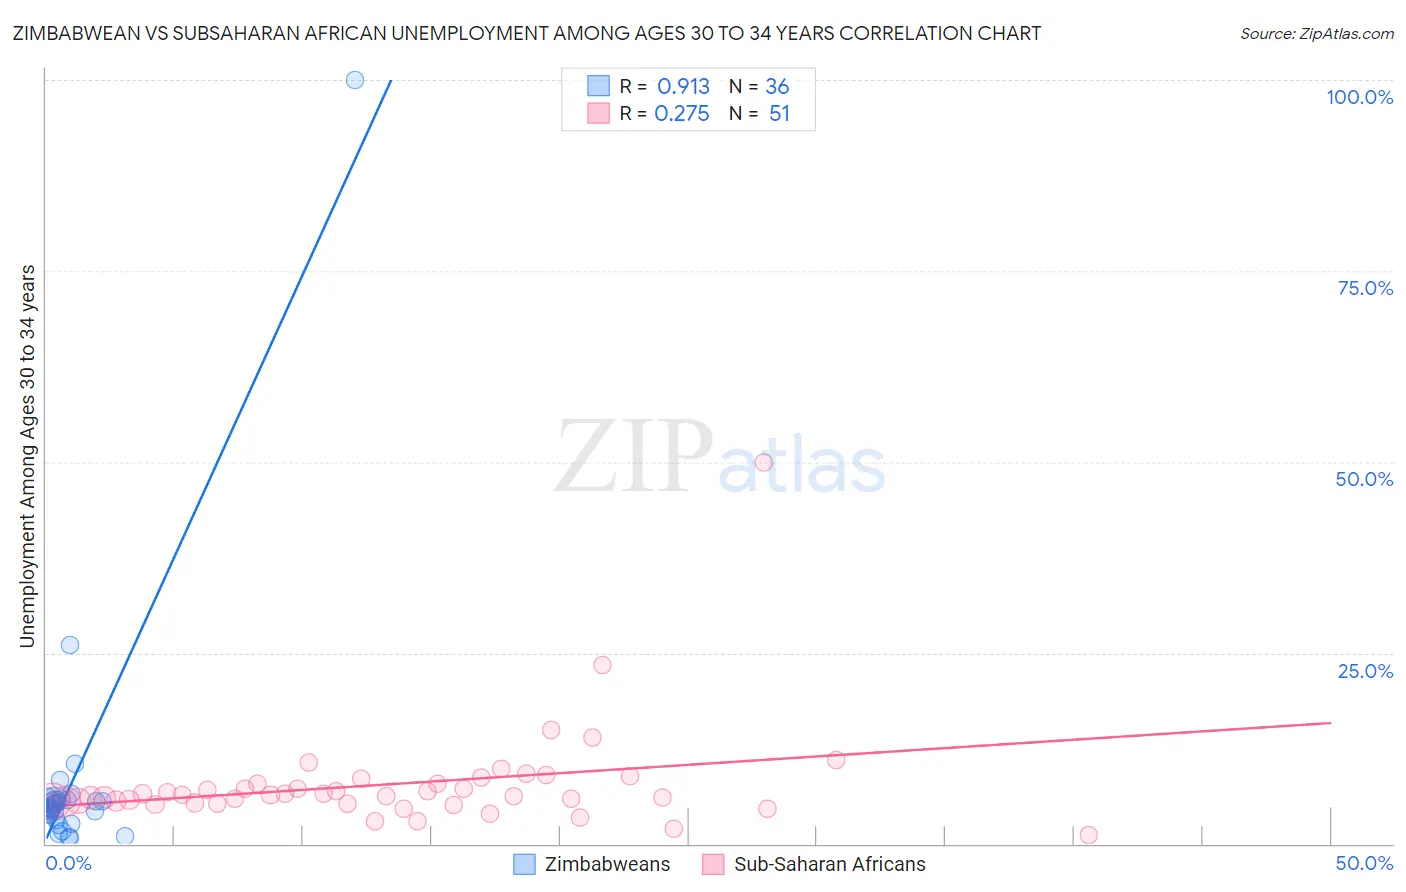 Zimbabwean vs Subsaharan African Unemployment Among Ages 30 to 34 years